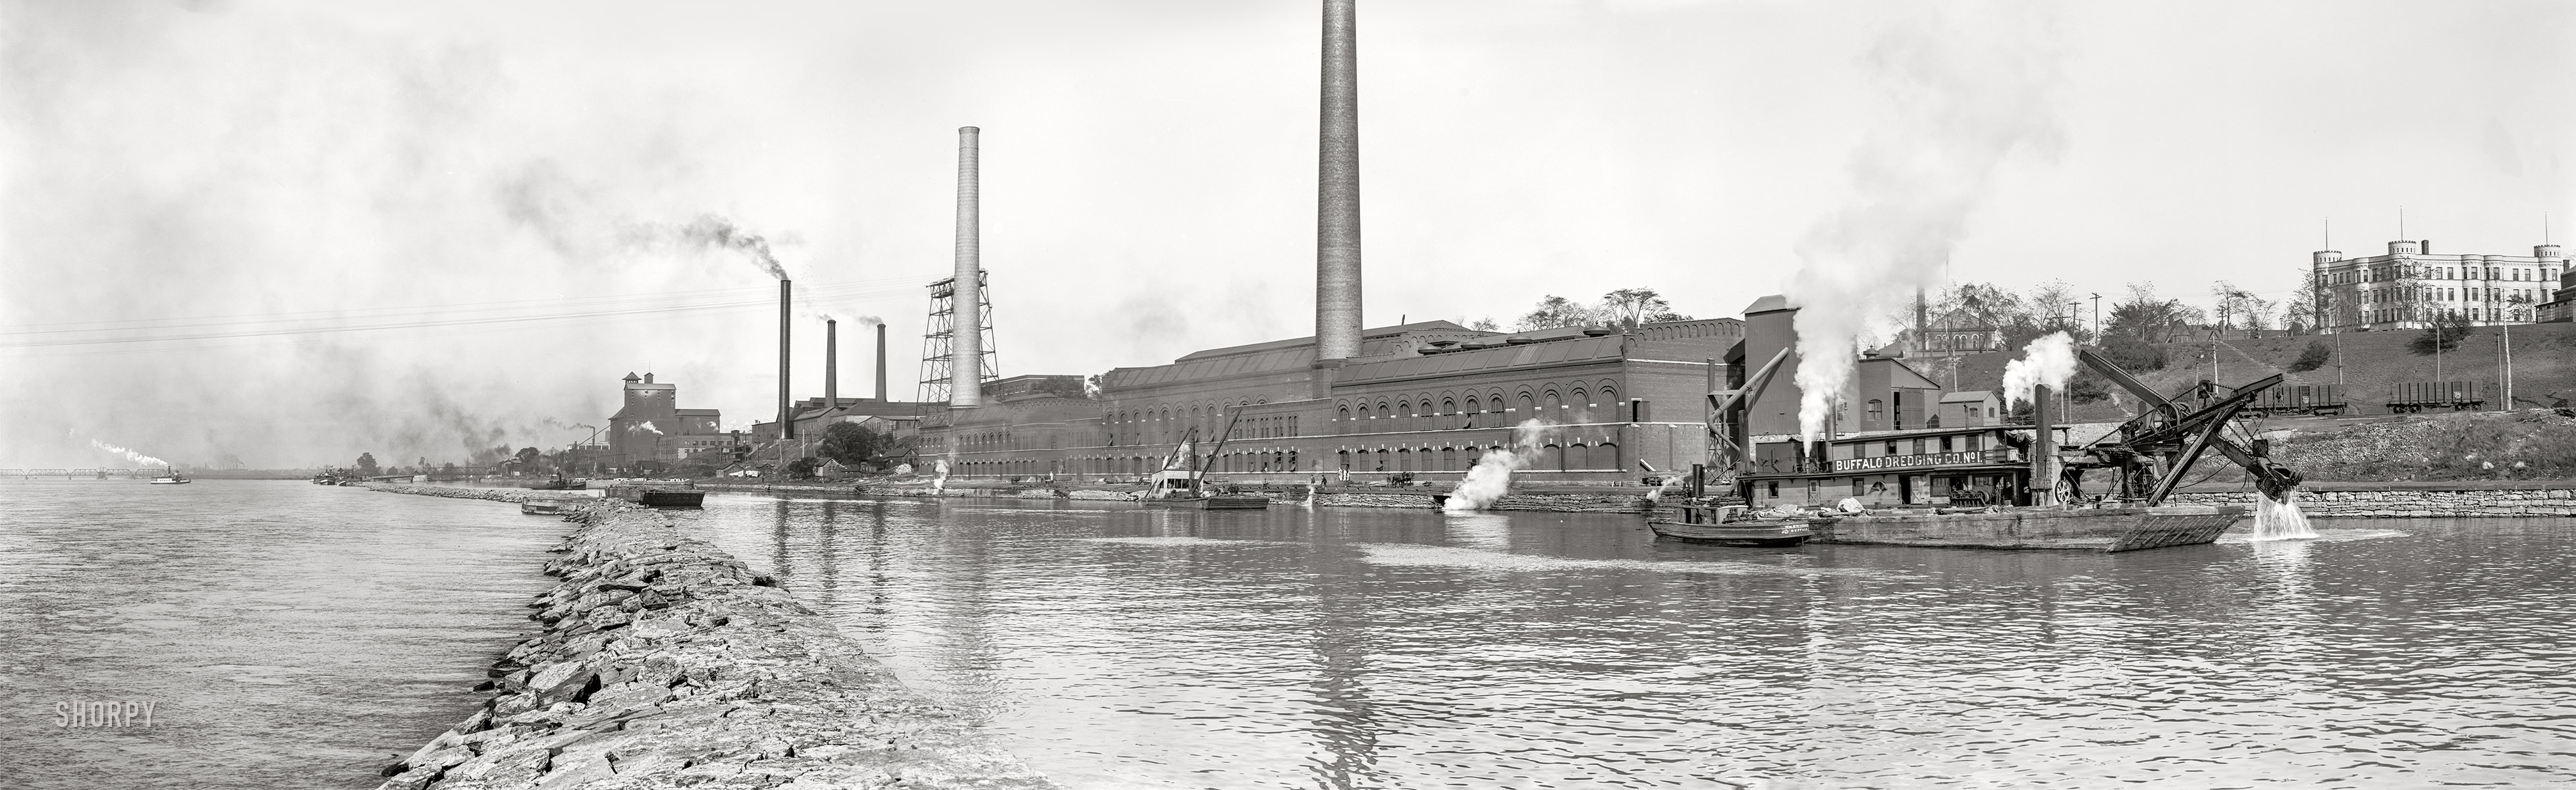 Circa 1905. "Waterworks and Niagara River, Buffalo, N.Y." Panorama made from three 8x10 inch glass negatives. Detroit Publishing Company. View full size.